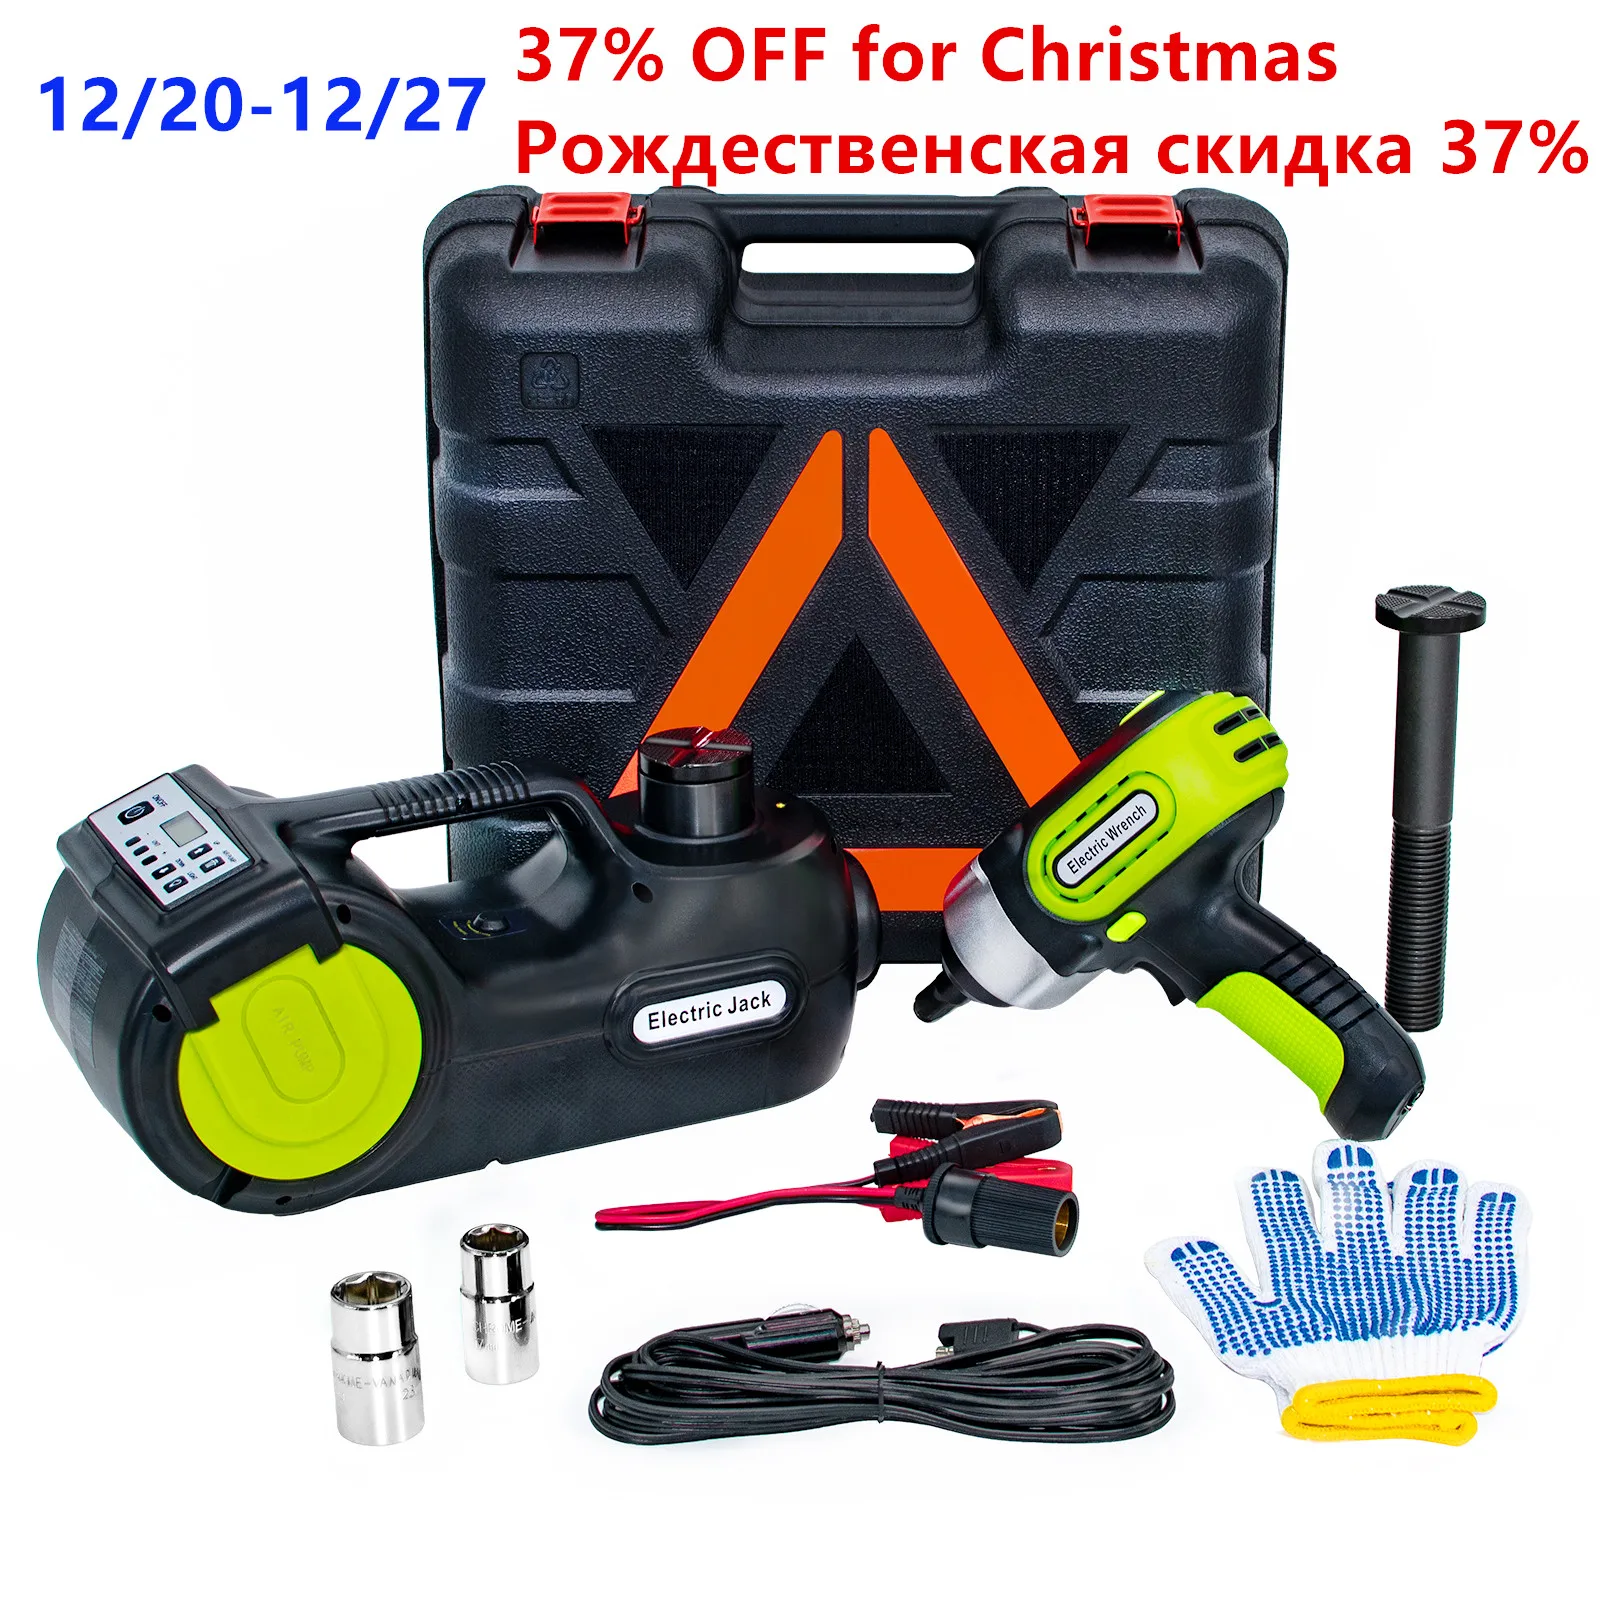 Portable 12V Electric Car Jack Kit 5Ton 4 in 1 Electric Hydraulic Jack Lifting Jack With Impact Wrench Compressor LED Light